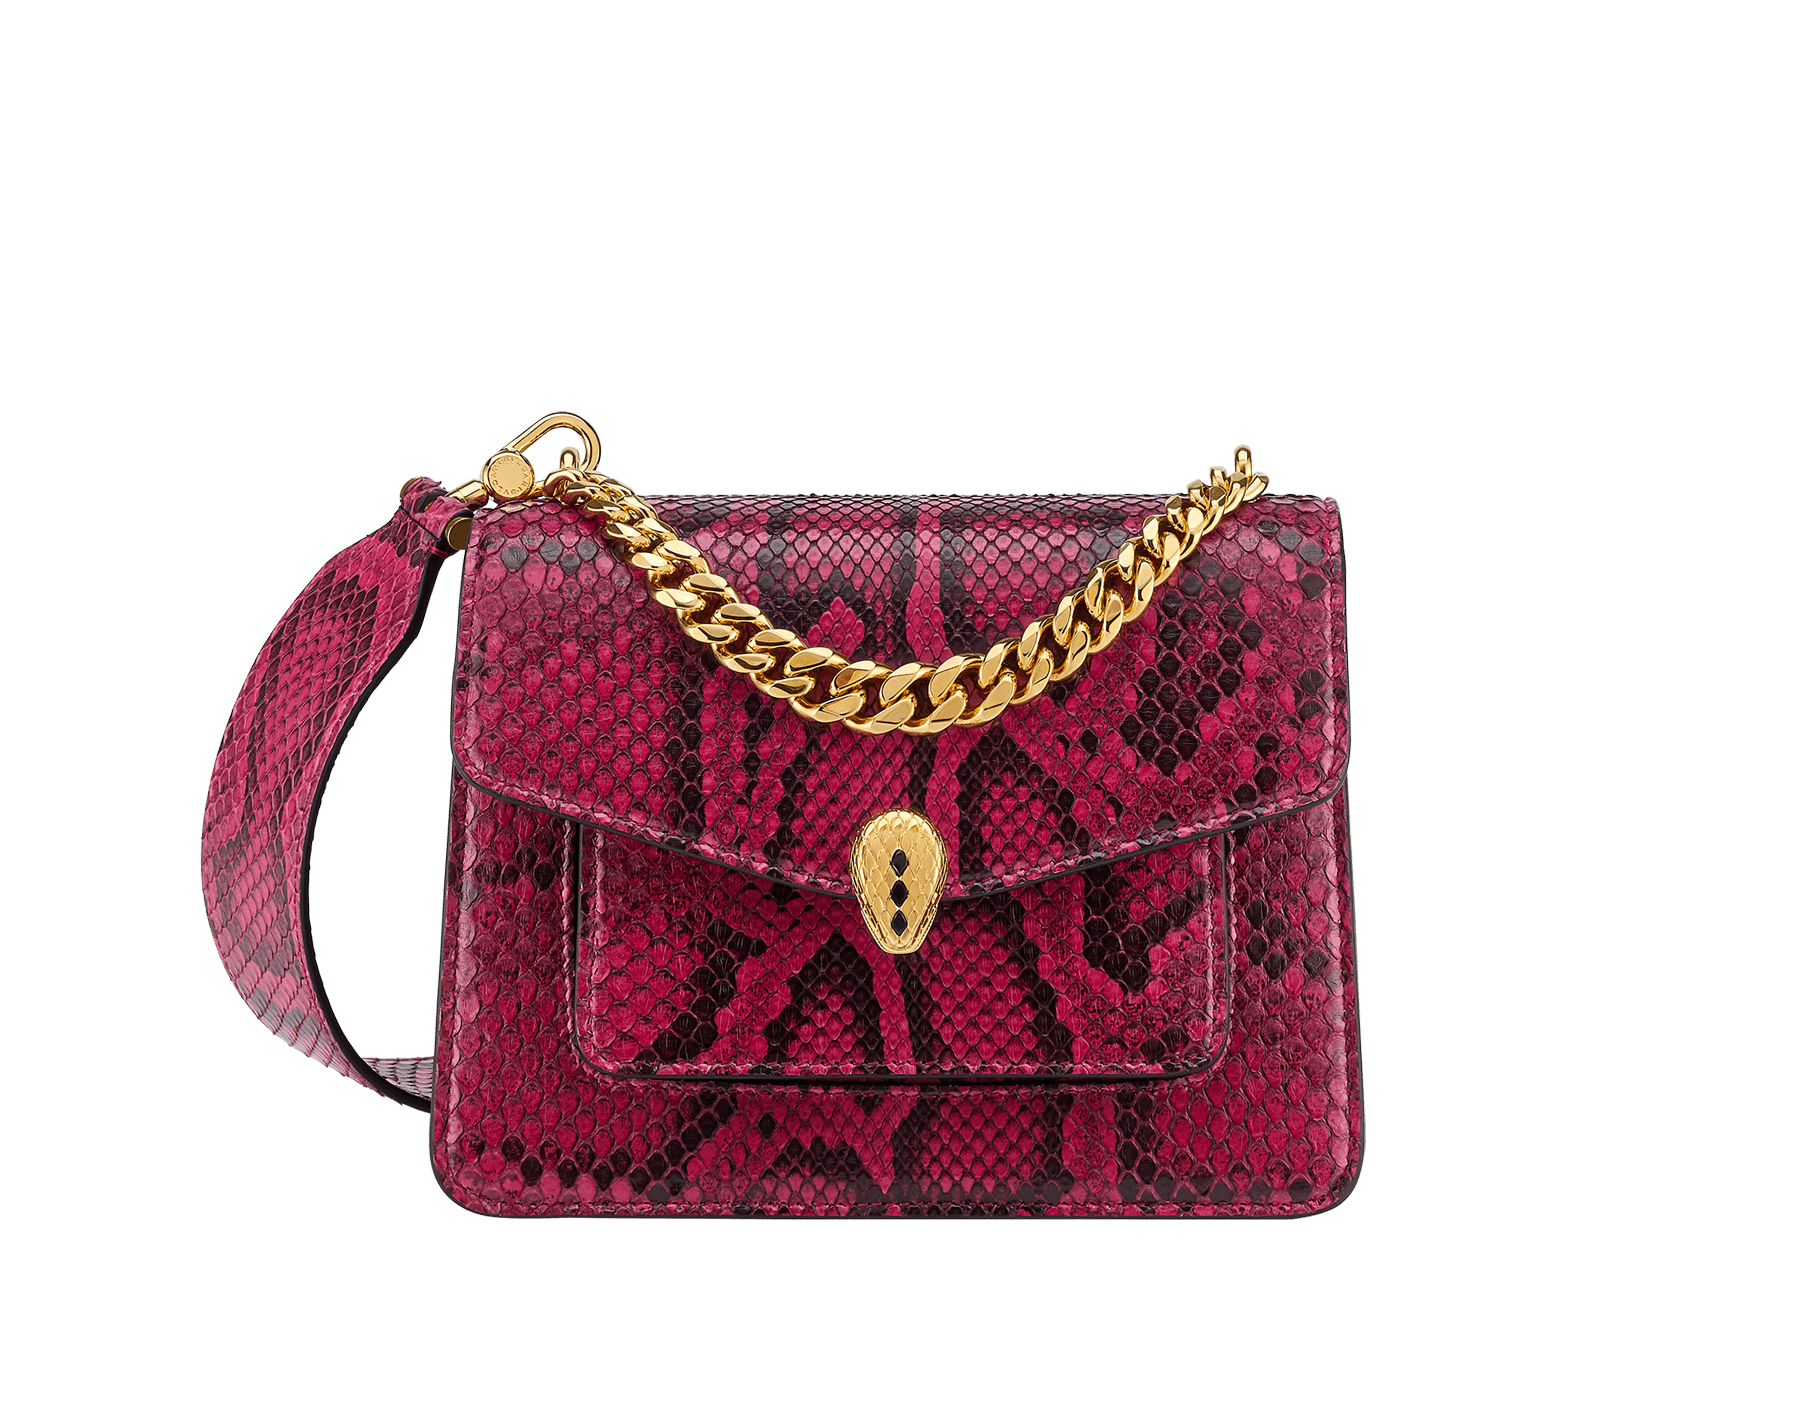 Serpenti Forever Maxi Chain small crossbody bag in anemone spinel pinkish red soft shiny python skin with black nappa leather lining. Captivating magnetic snakehead closure in gold-plated brass embellished with black onyx scales and red enamel eyes. 1134-SSP image 1